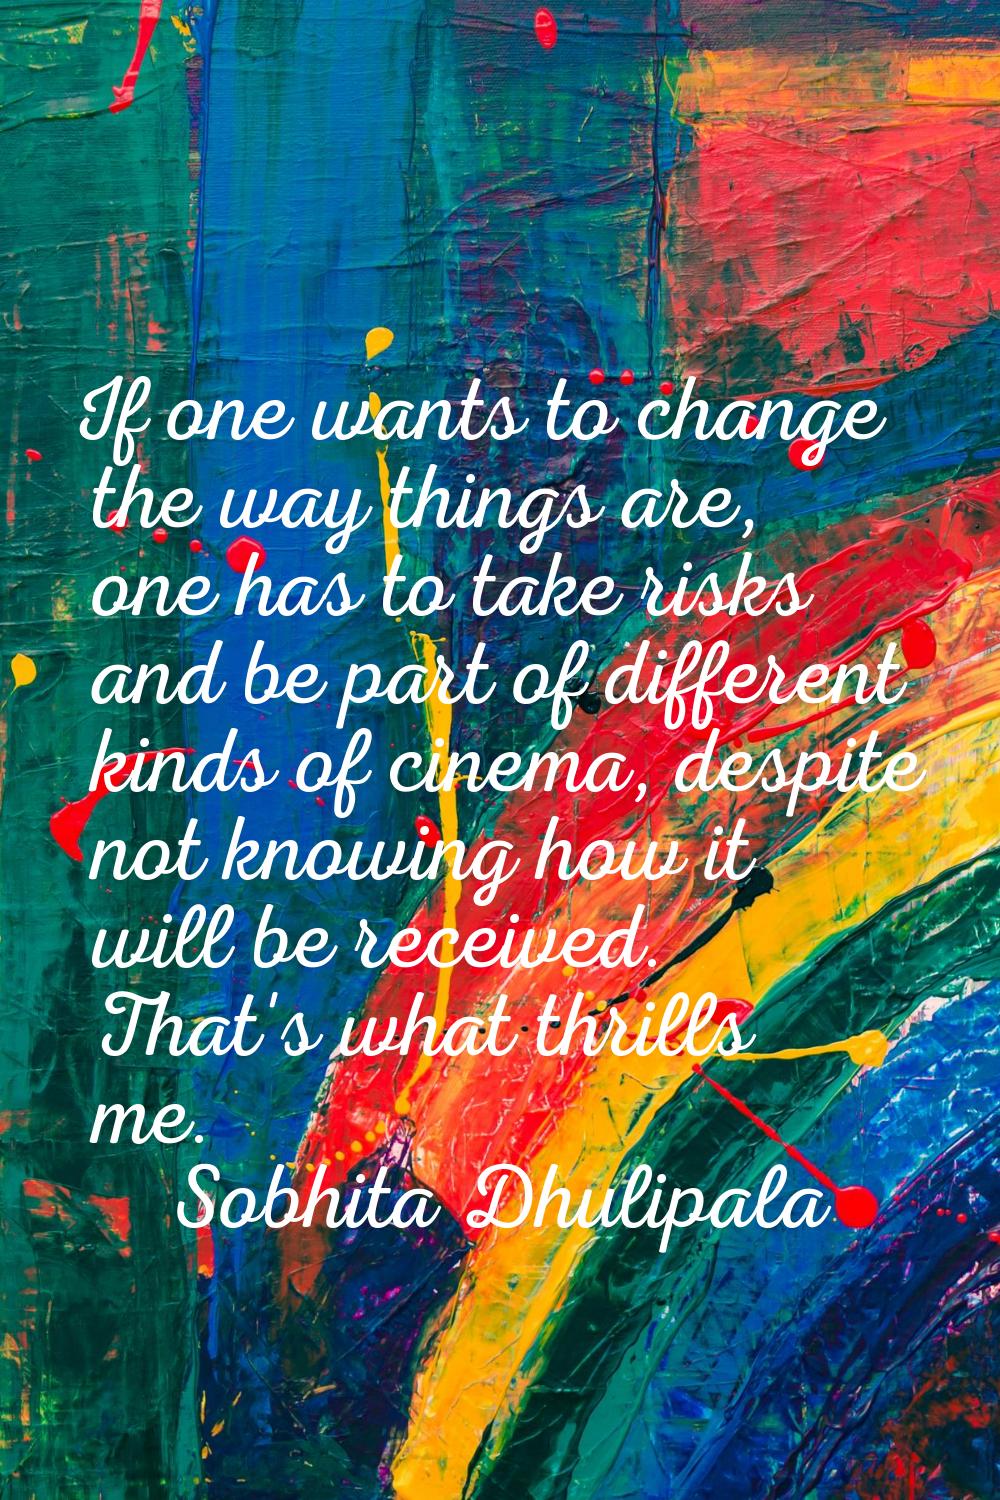 If one wants to change the way things are, one has to take risks and be part of different kinds of 